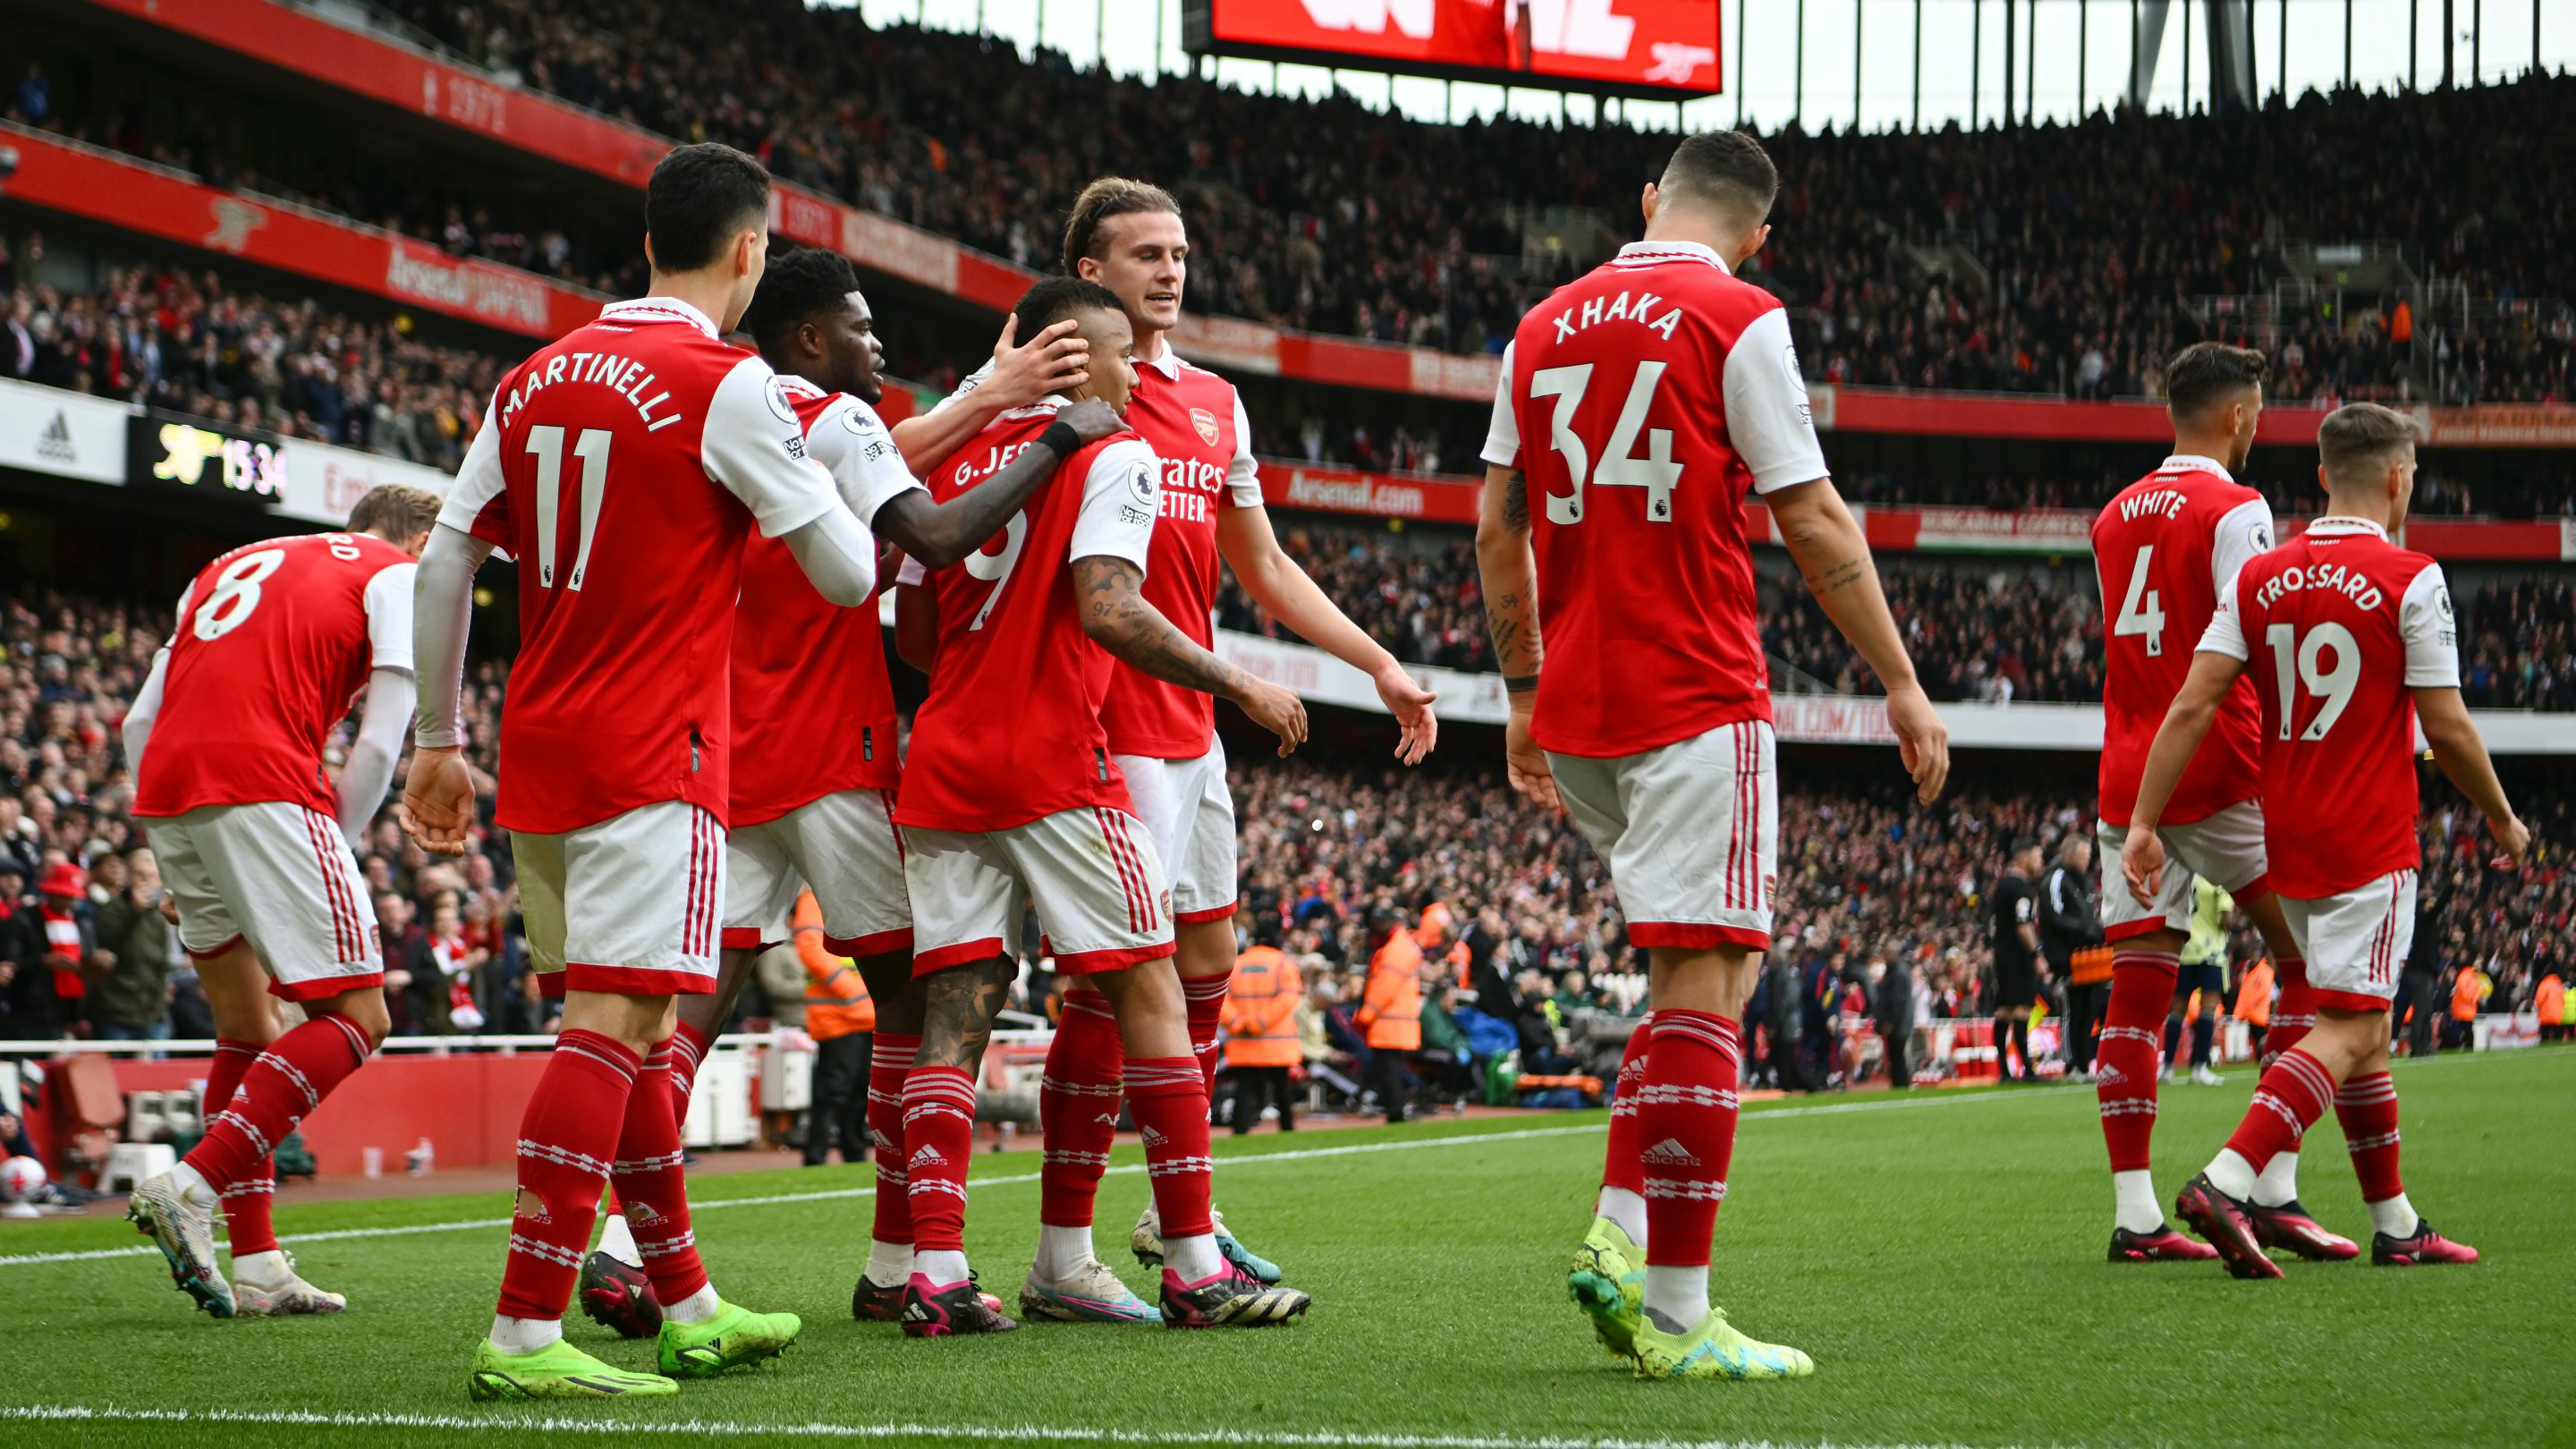 Premier League form table after Arsenal & Man City win in title race